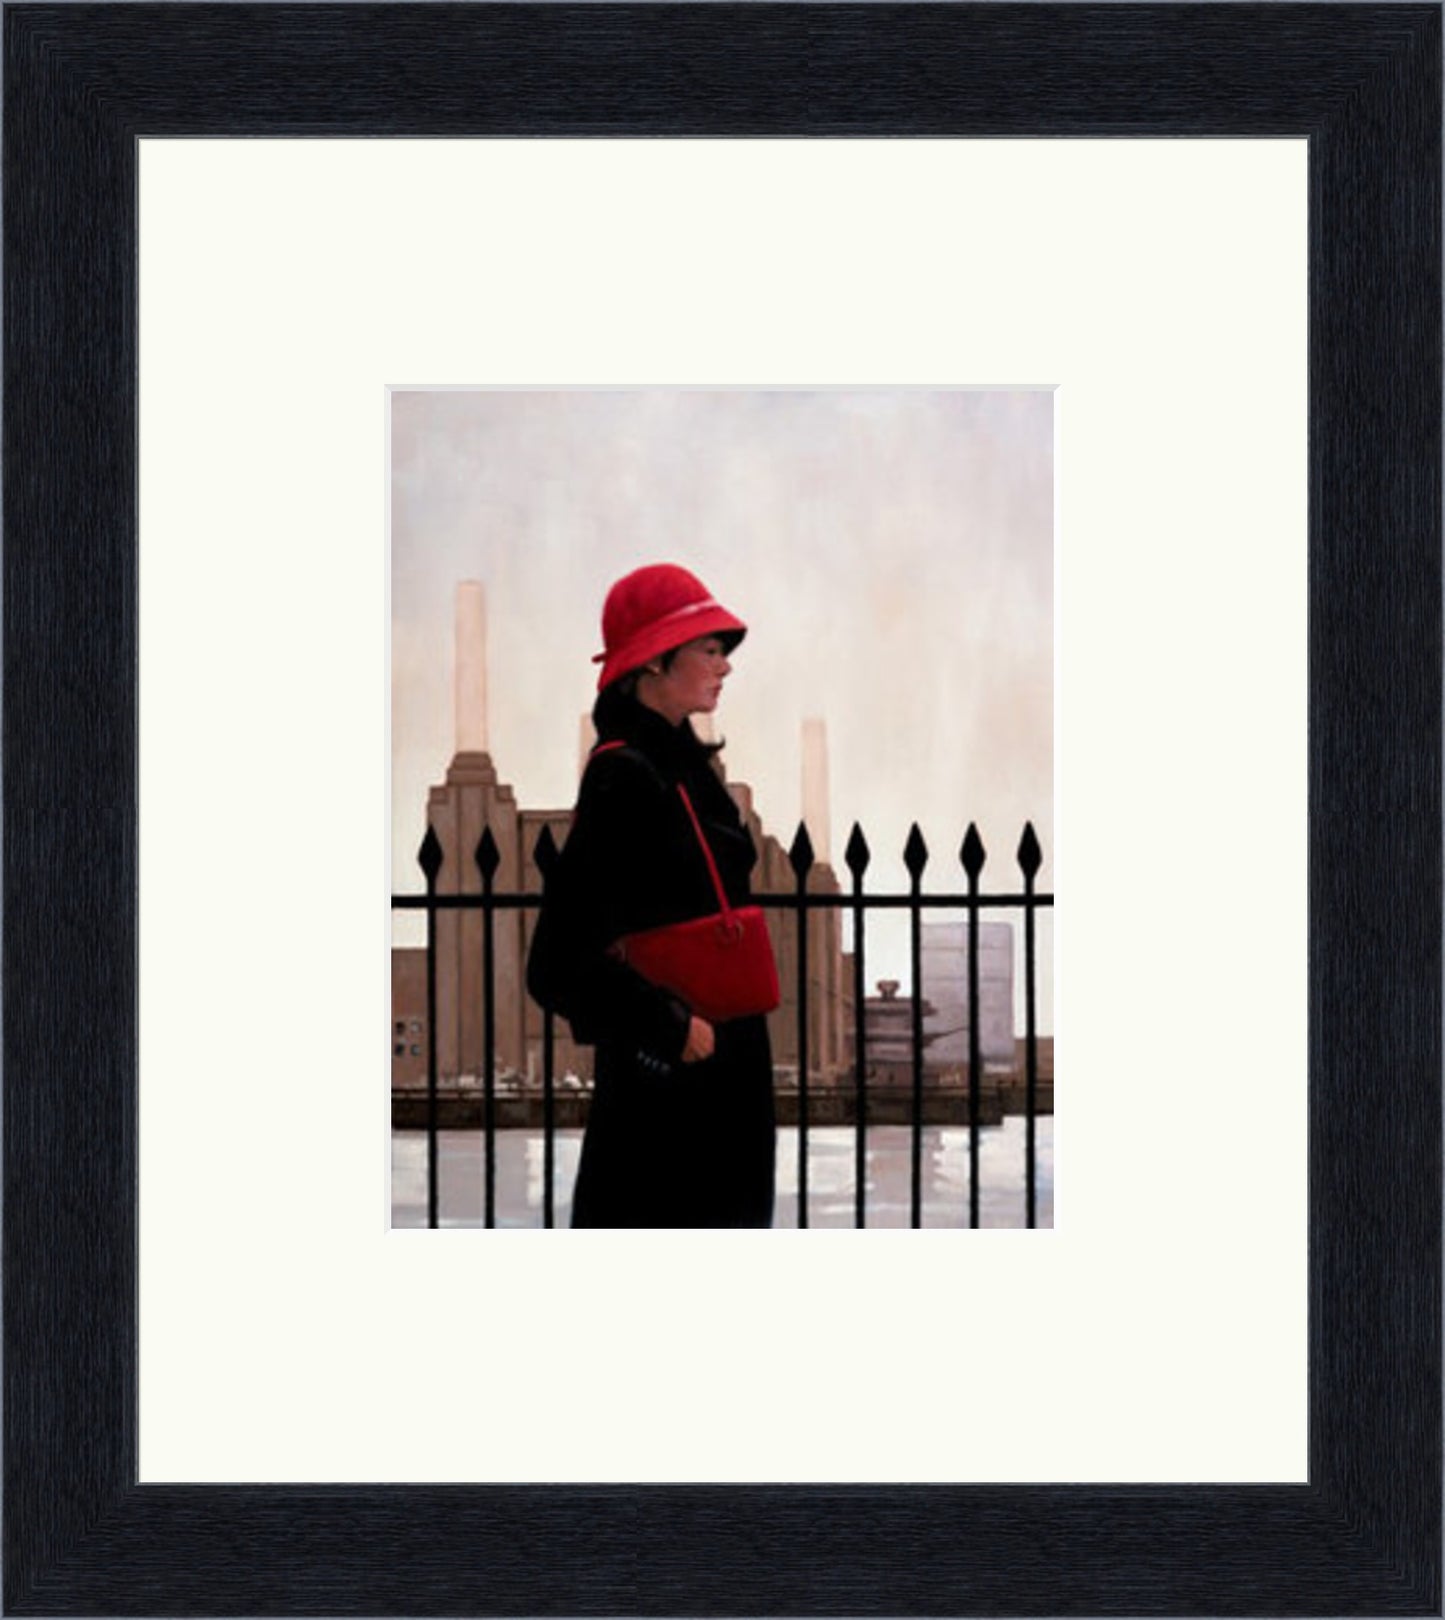 Just Another Day by Jack Vettriano - Petite